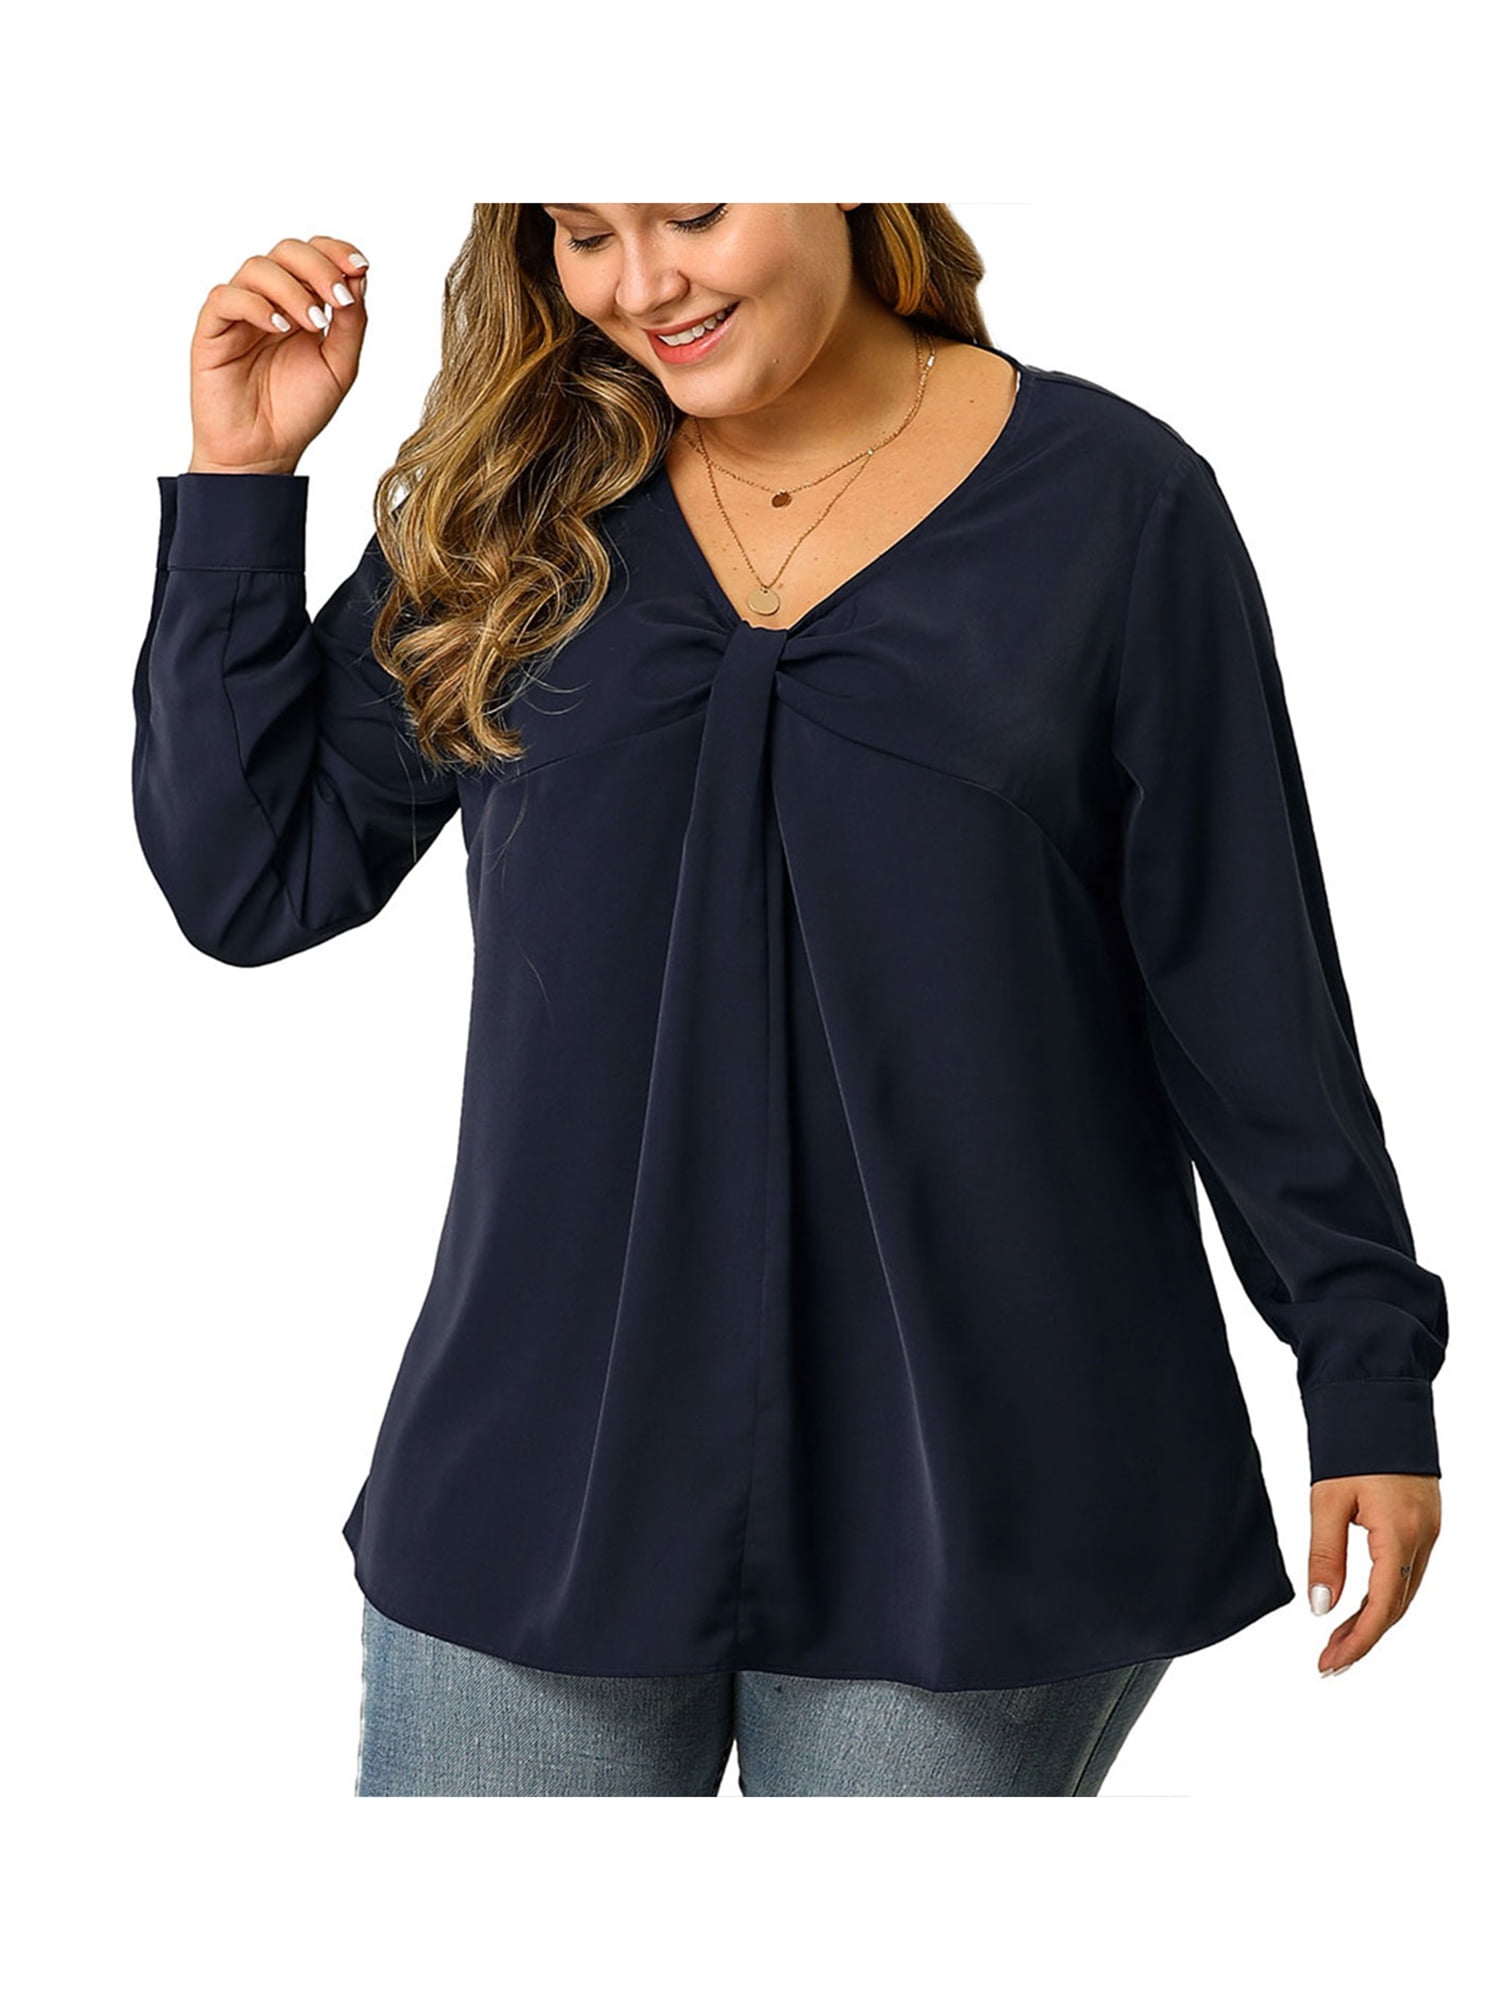 VEKDONE Women Plus Size Casual Tunic Tops Short Sleeve V Neck Cuffed Pleated Zip Up Fitted Plain Shirts Blouse